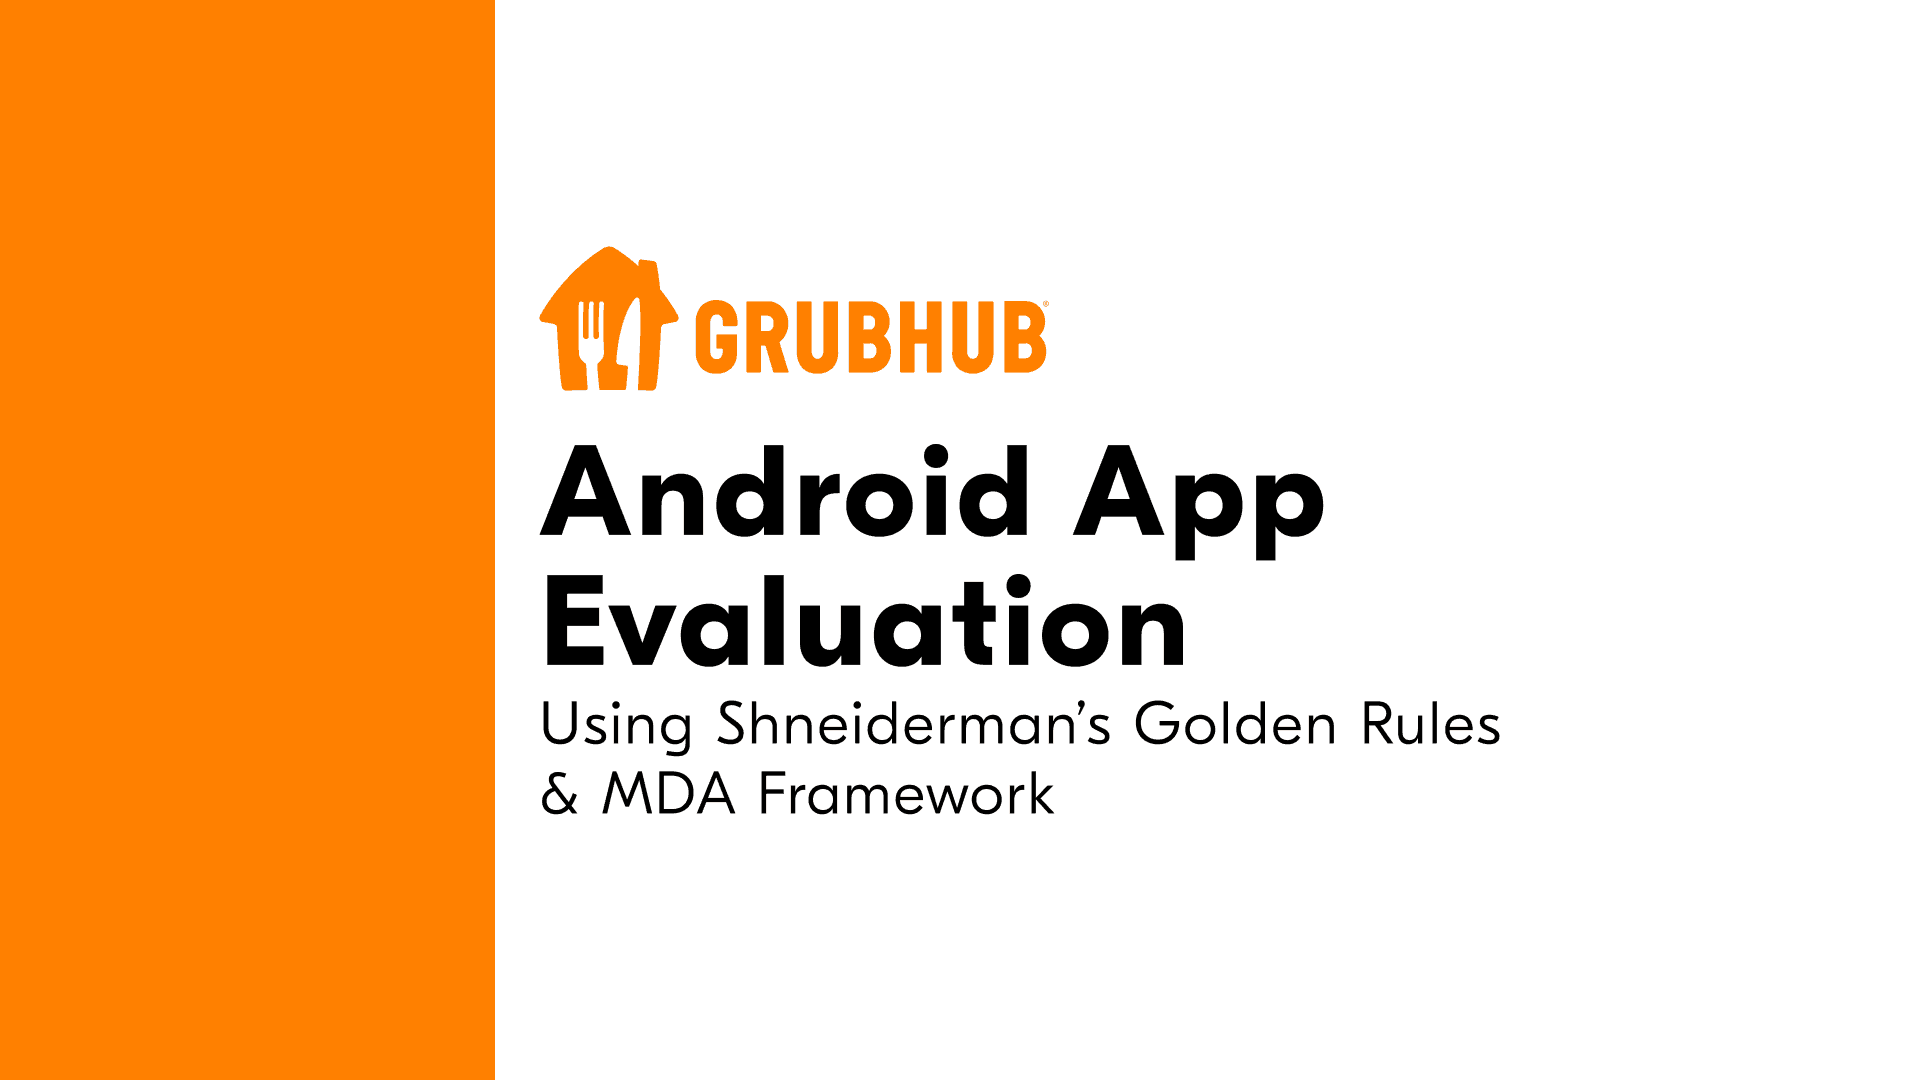 Cover Image for the post GrubHub Android App — Heuristic Evaluation